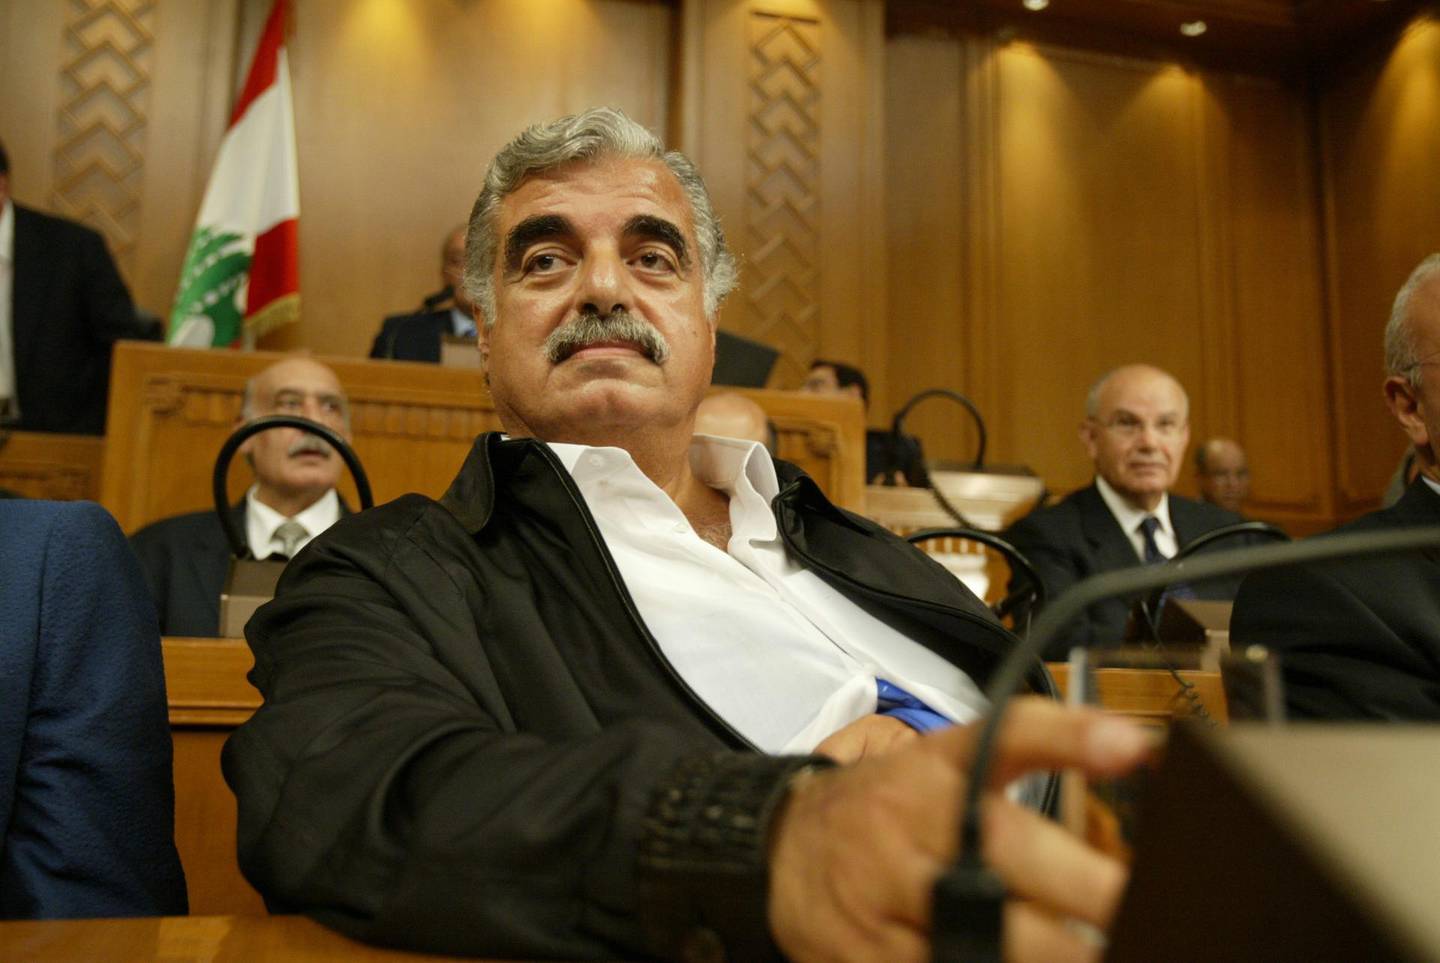 (FILES) In this file photo taken on September 3, 2004 Lebanese Prime Minister Rafiq Hariri attends a parliamentary session in Beirut. - The trial of four Hezbollah suspects in the assassination of Lebanese ex-prime minister Rafiq Hariri, killed in 2005, enters the final stretch on September 11, 2018 in a special UN-backed court in the Netherlands, with closing arguments in the long-running case. (Photo by Joseph BARRAK / AFP)